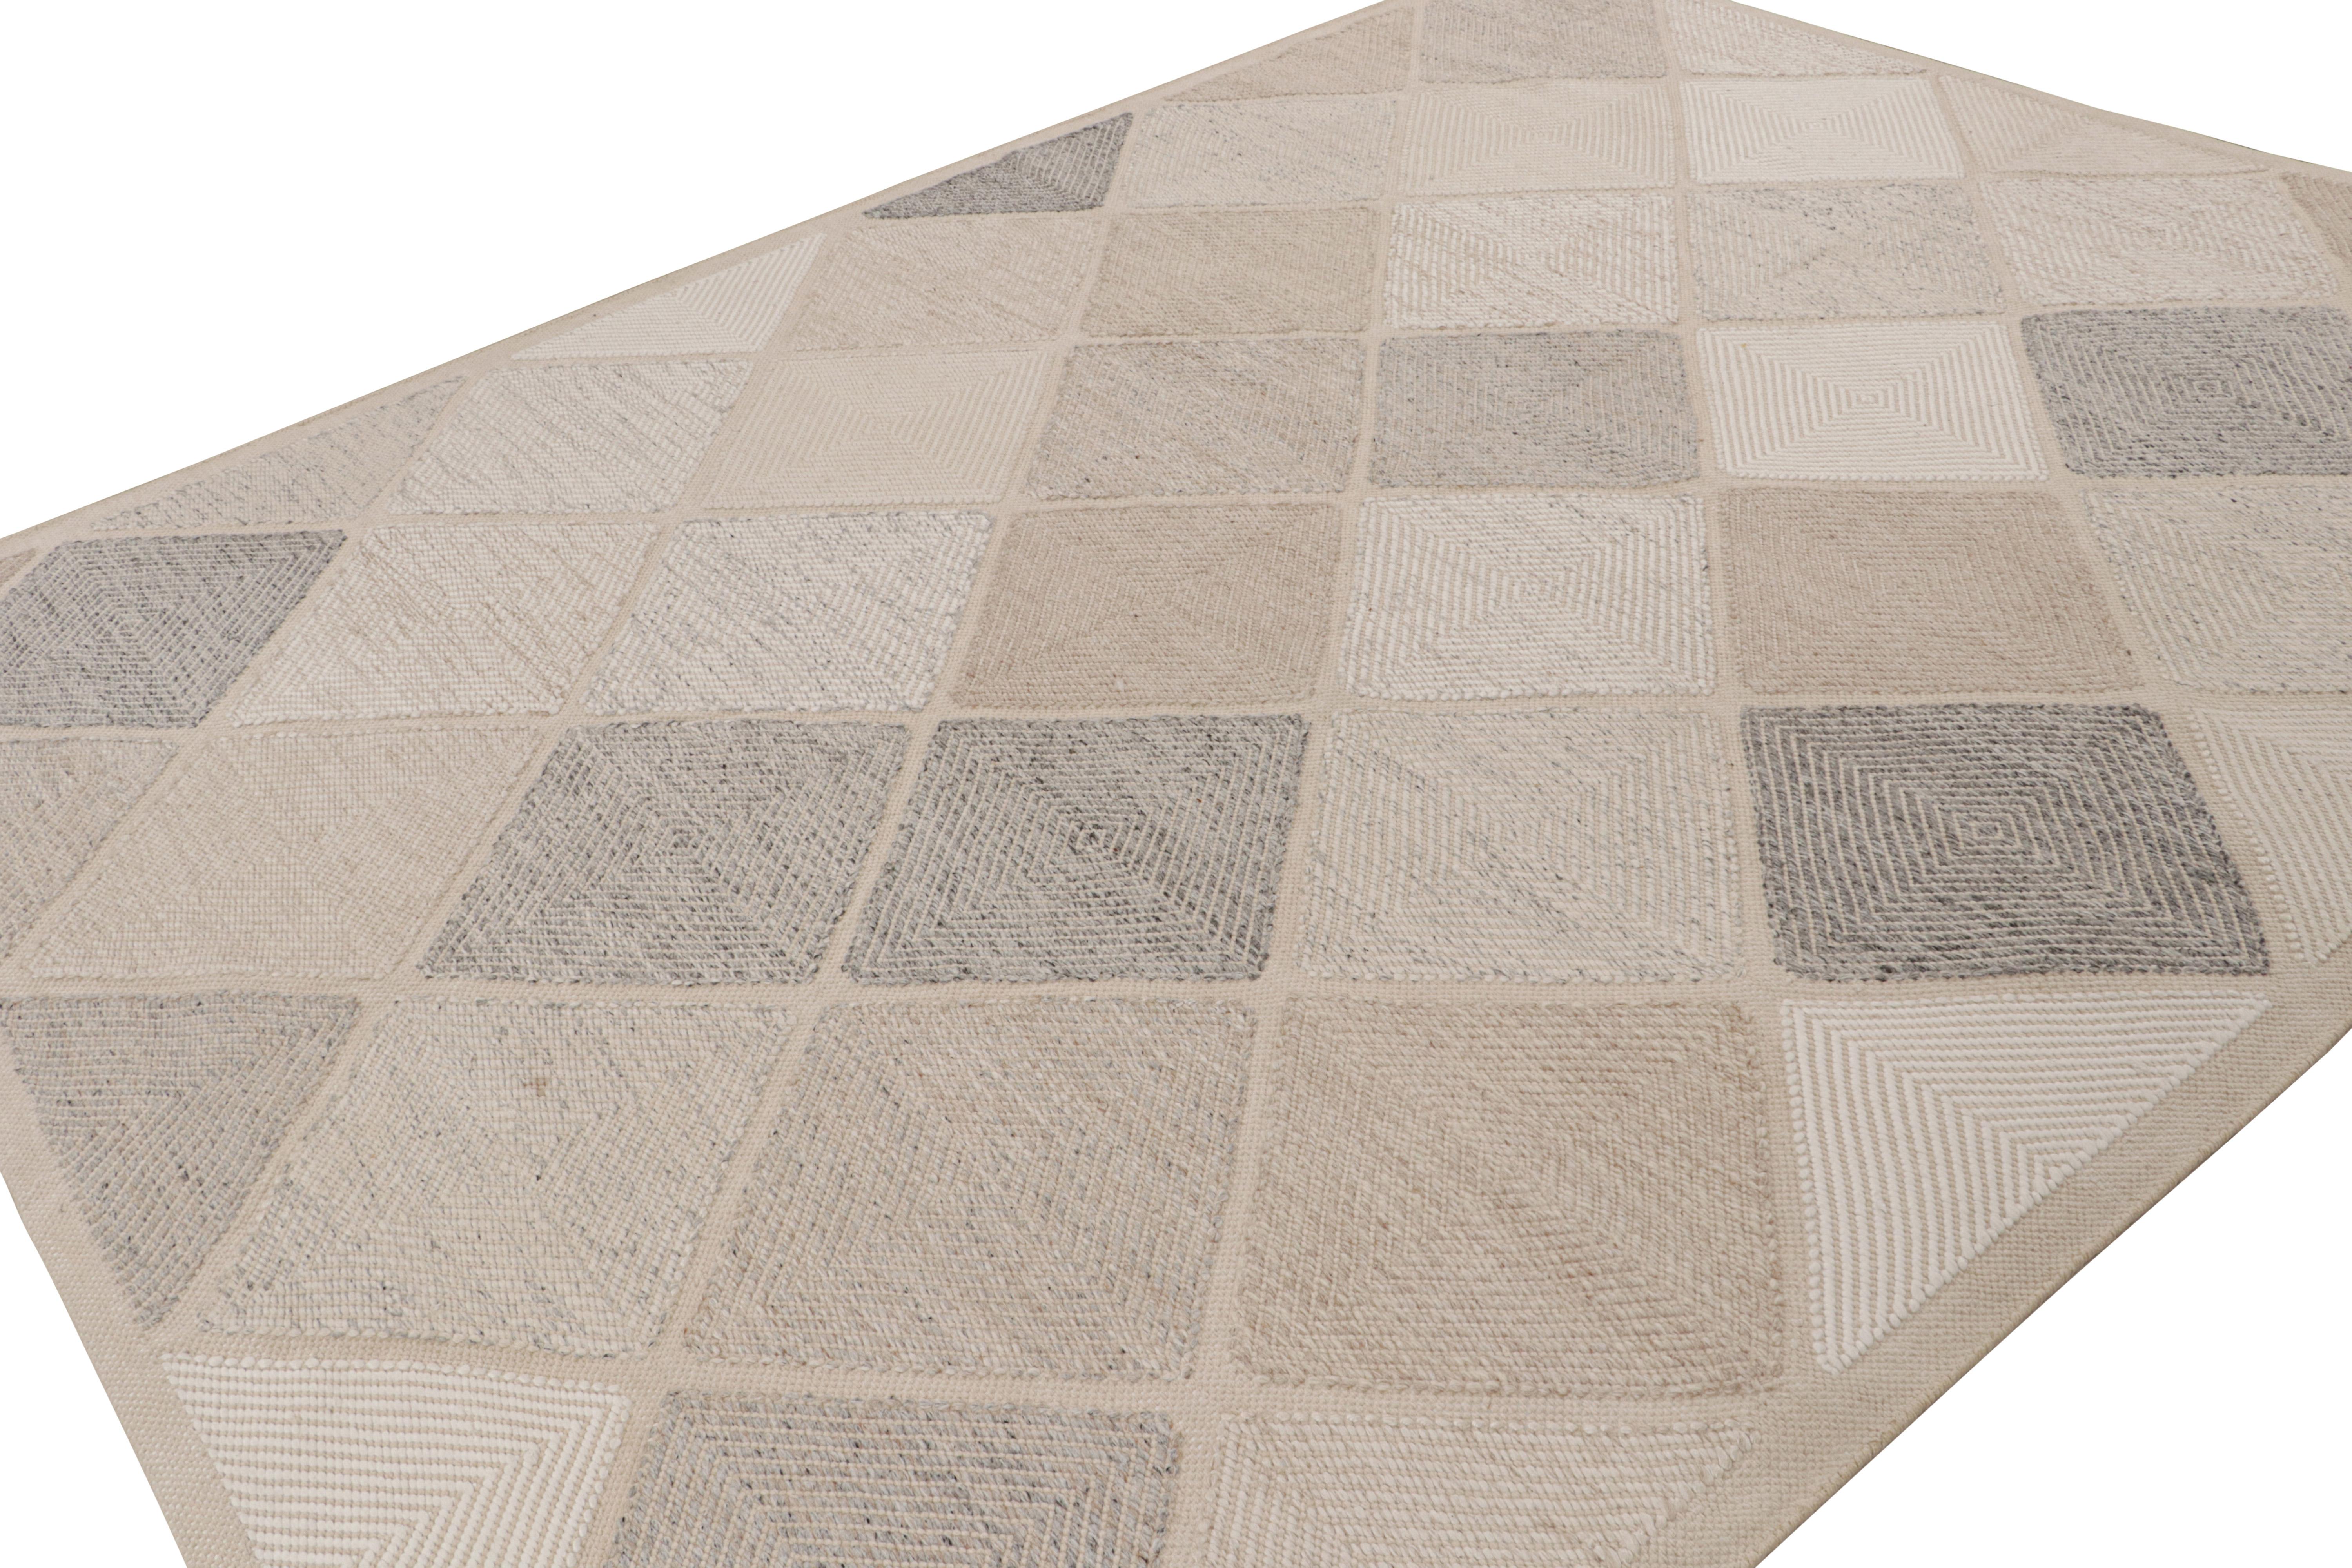 Hand-knotted in wool, this 8x11 Scandinavian rug represents a unique line in our collection with some inspiration from Moroccan rugs in its diamond patterns.  

On the design: 

This Scandinavian masterpiece is an especially well-received line of